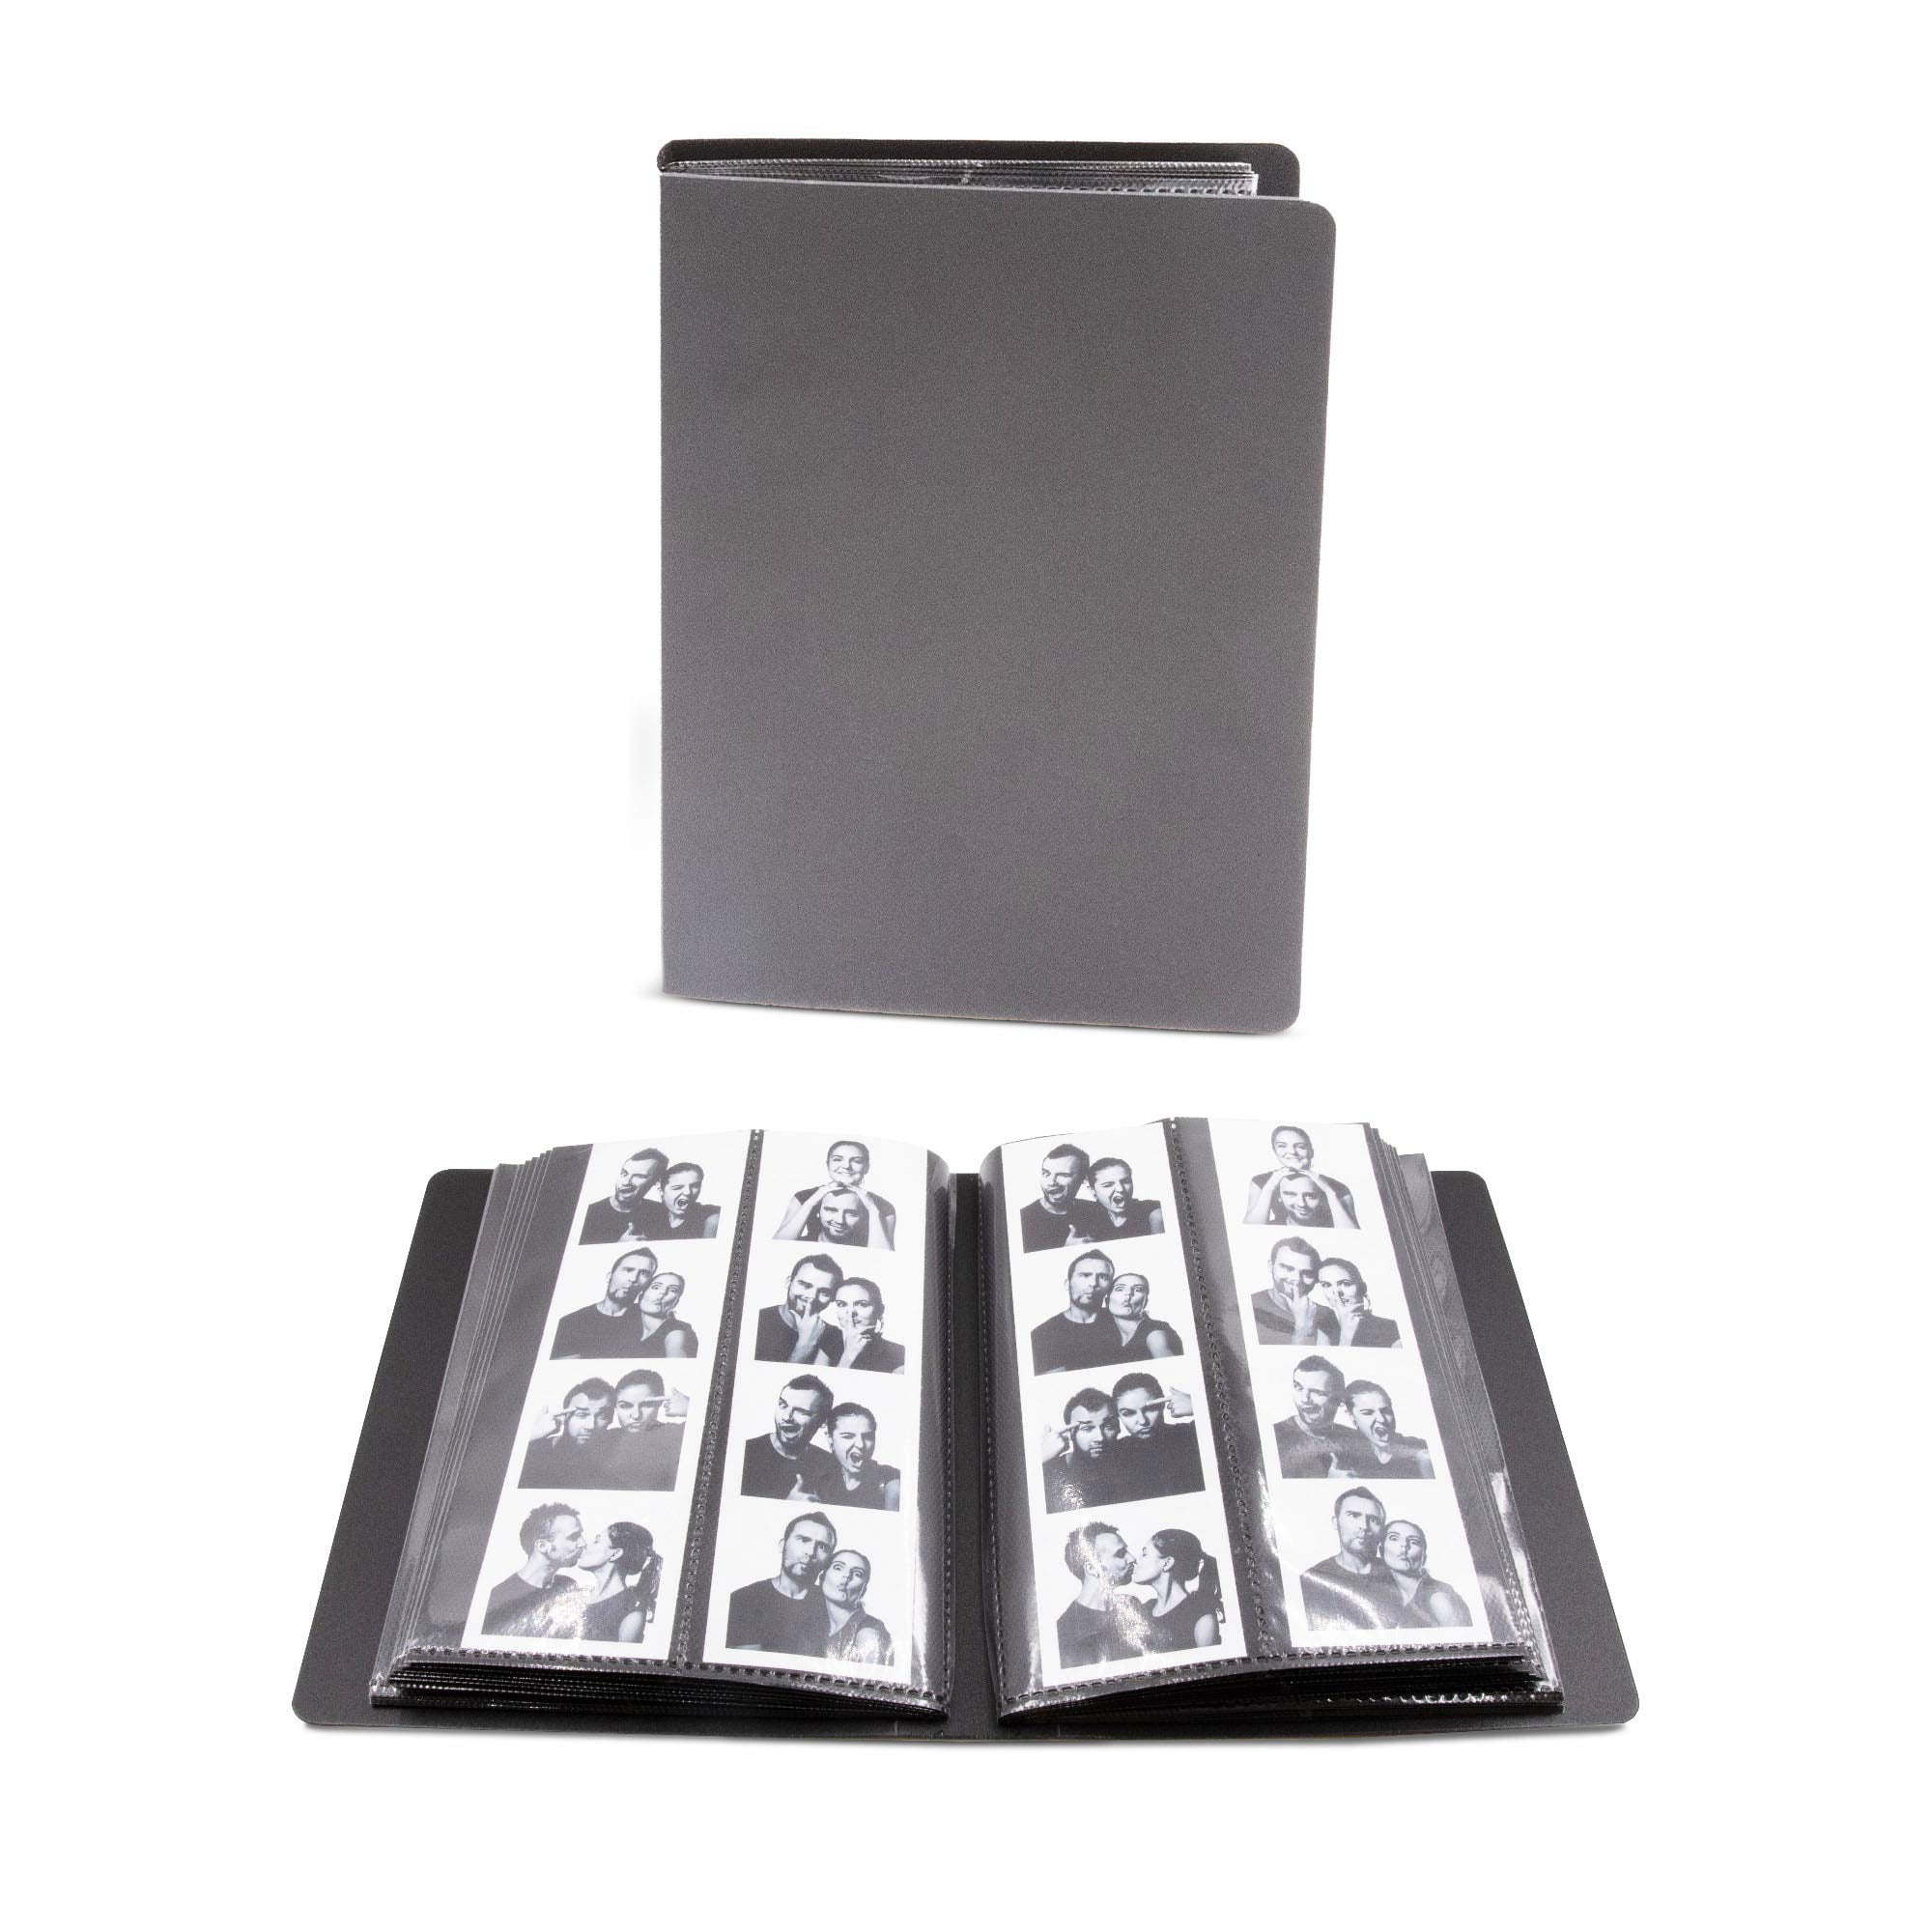 Buy Photo Booth Album for 2x6 Photo Strips Holds 216 Photobooth Photos on  54 Pages Slide-in Photo Booth Photo Album Wedding Scrapbook Online in India  